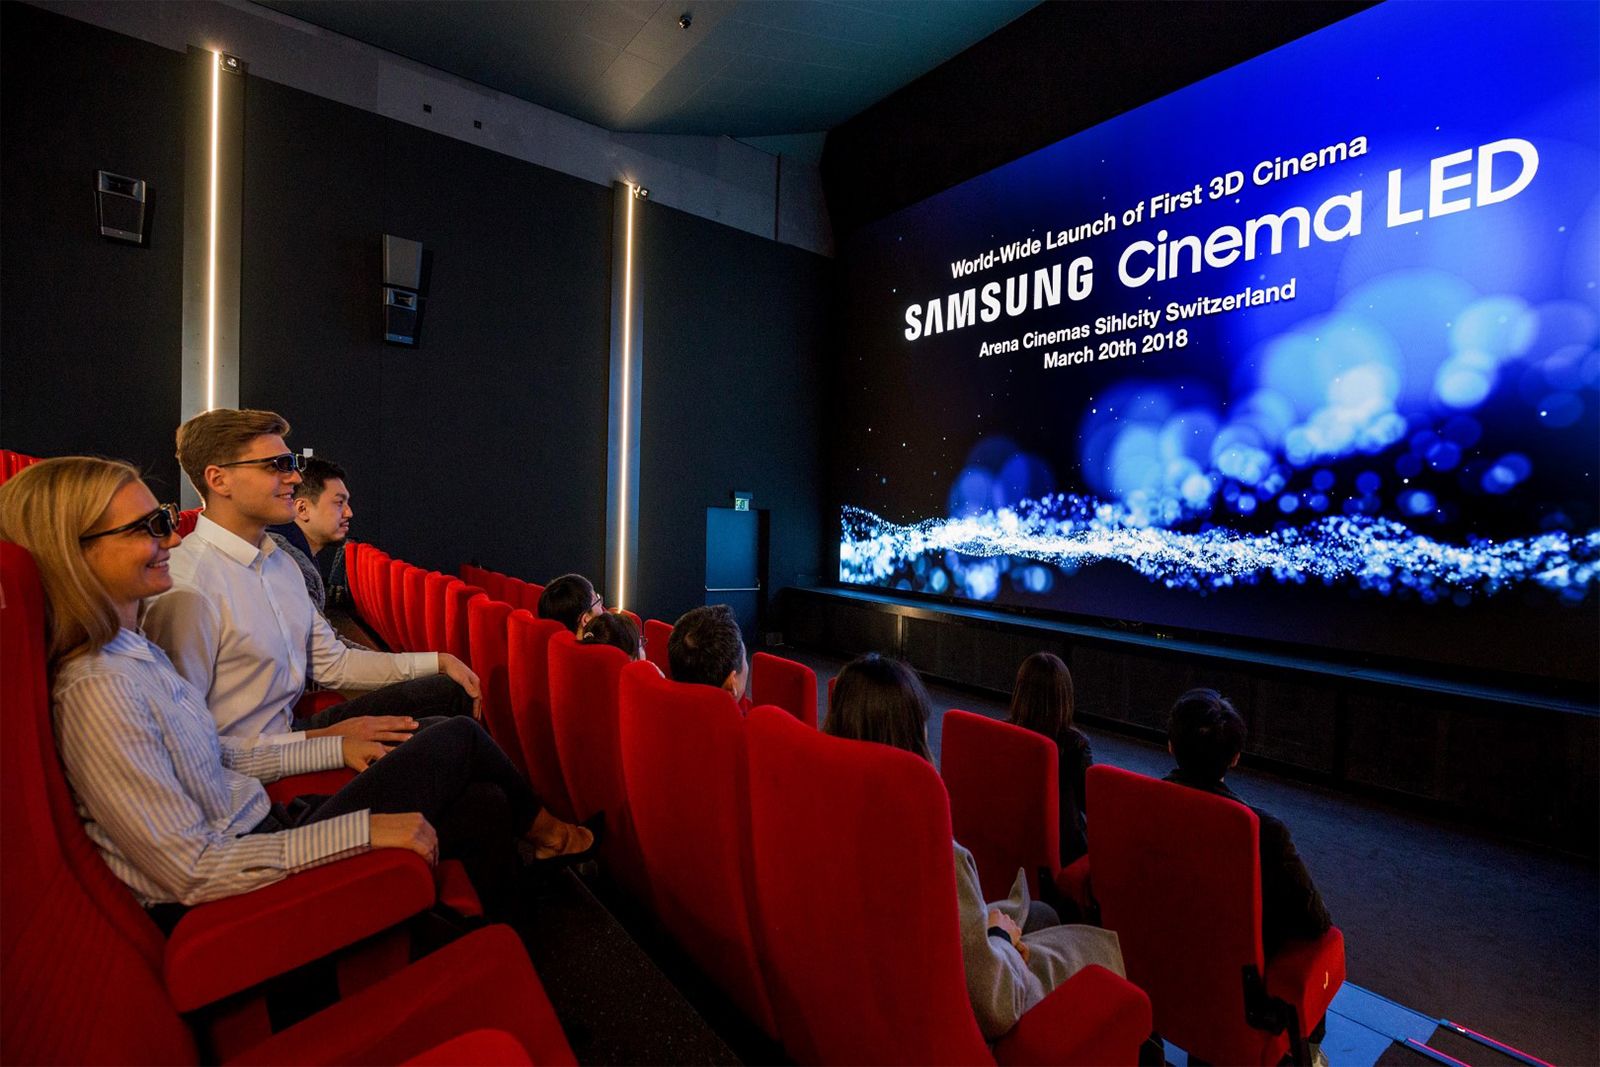 Samsungs 3D Cinema LED screen gets its world debut in Switzerland image 1